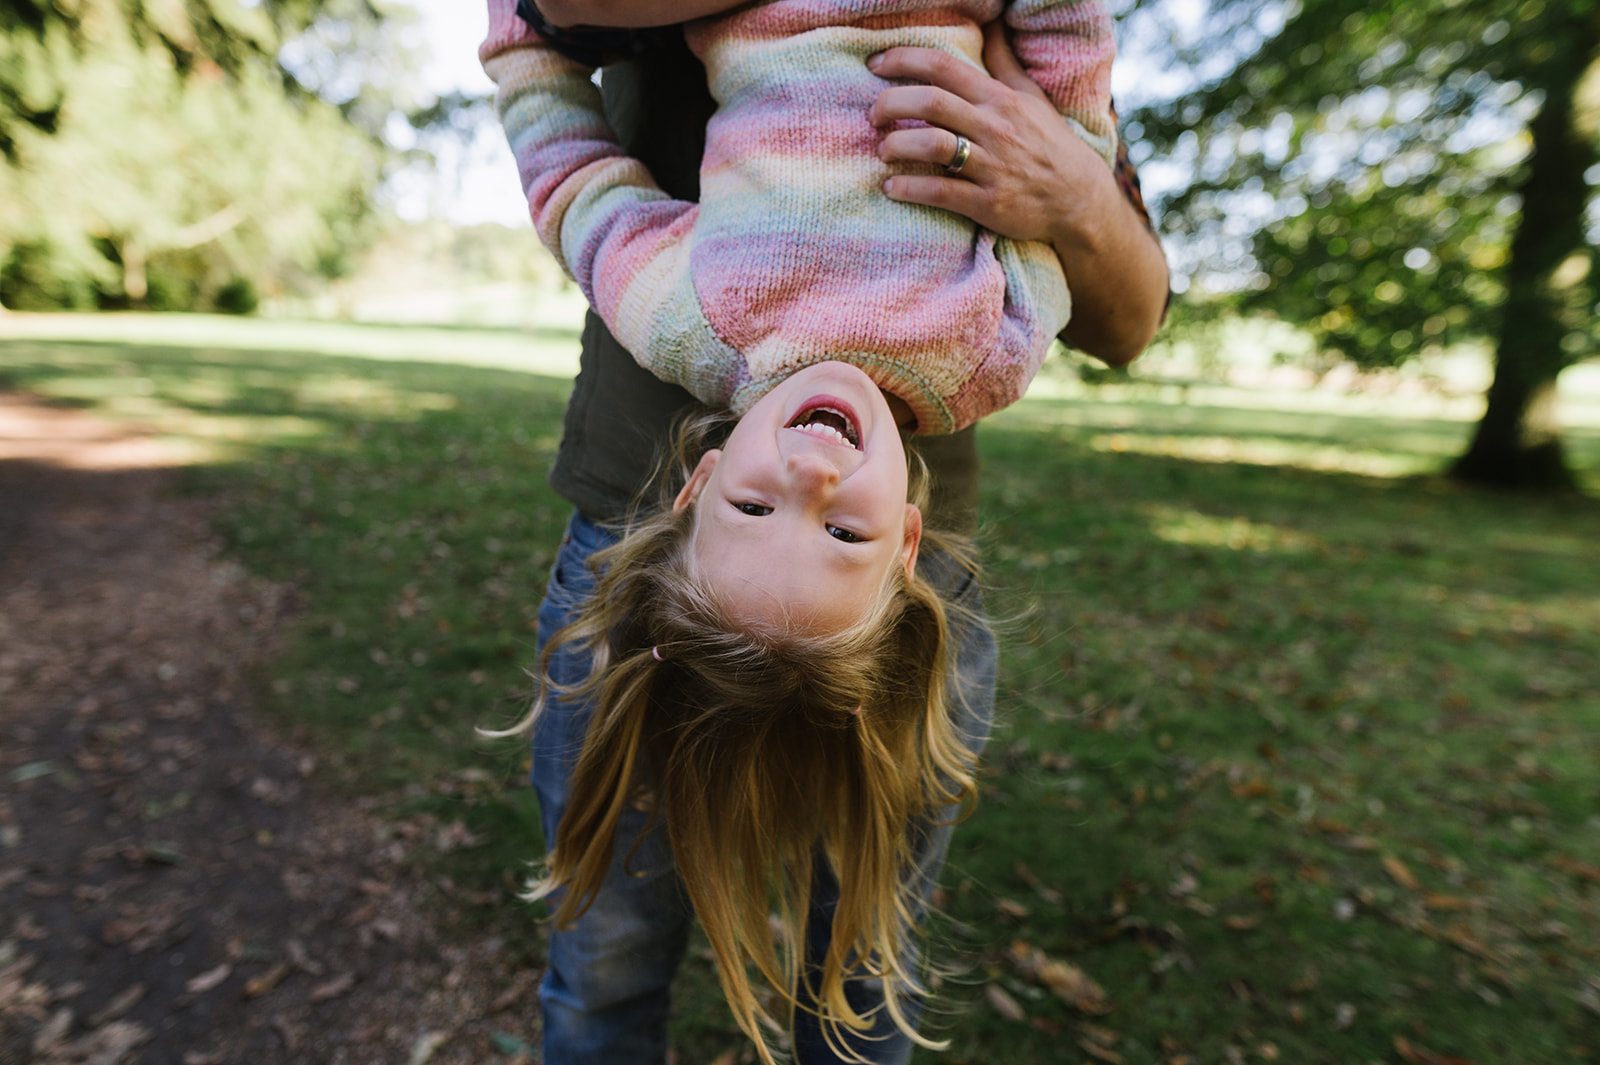 relaxed extended family photos at Croome, Worcestershire